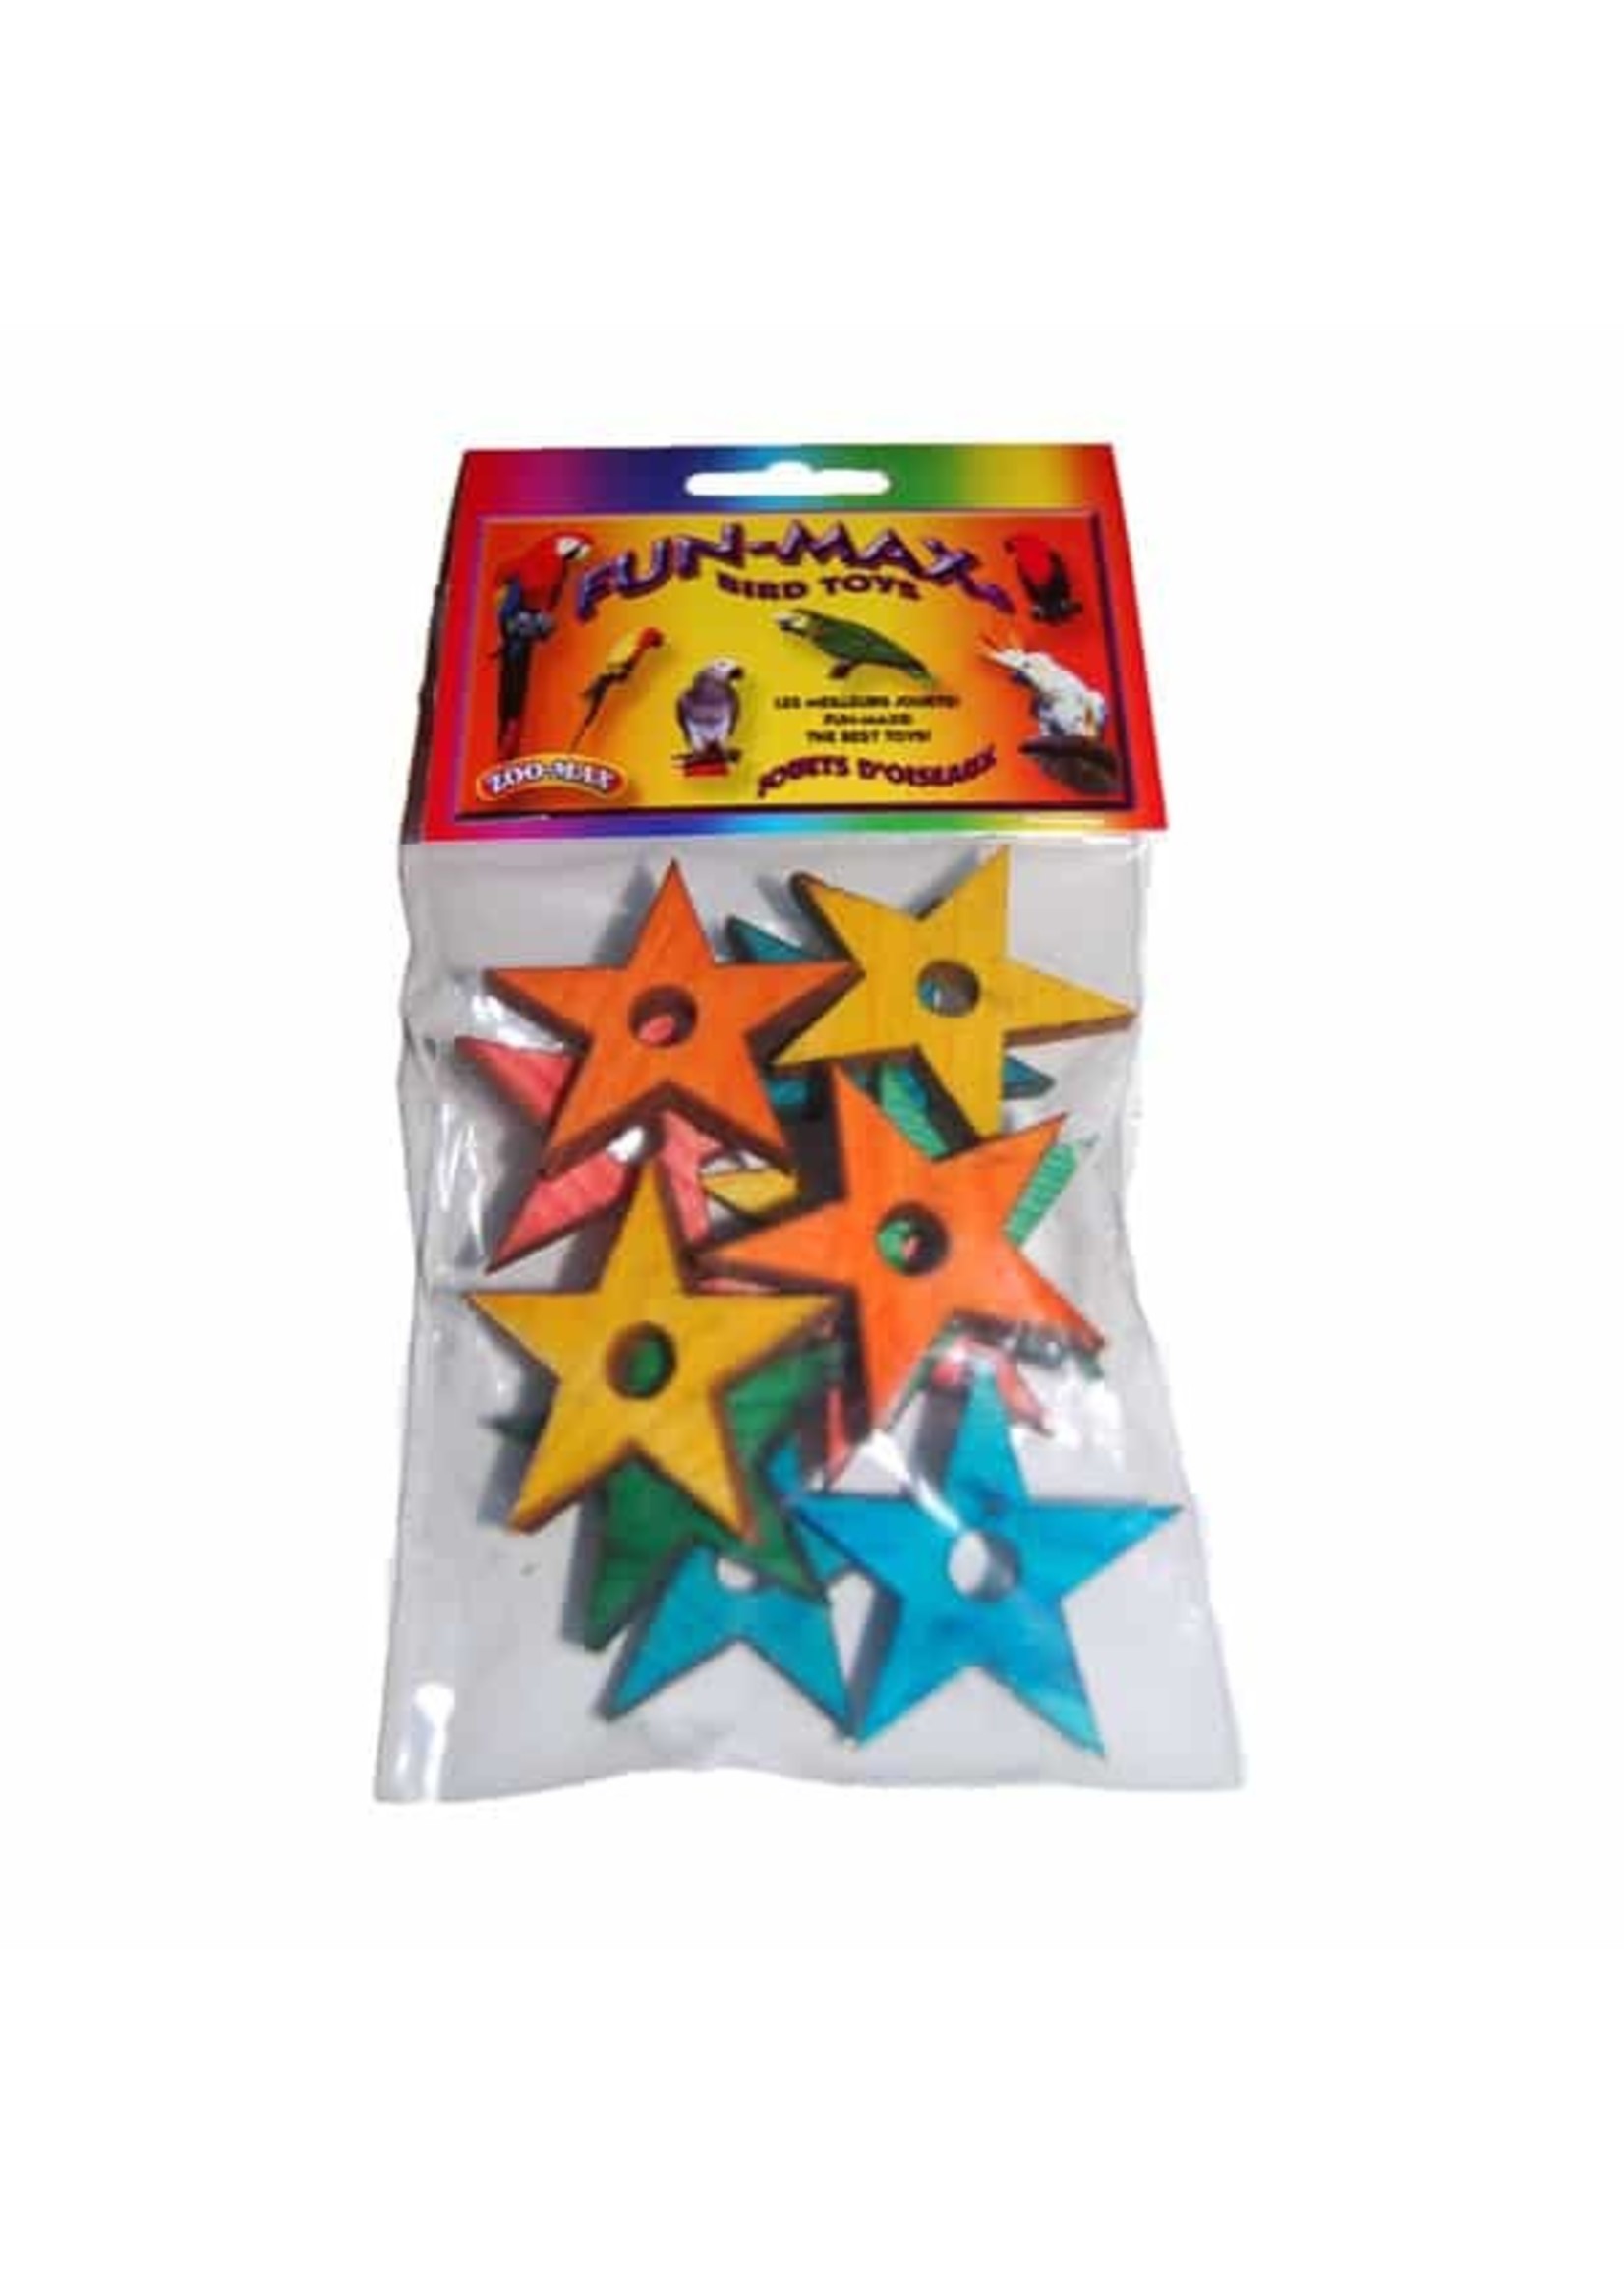 Zoo-Max ZOO MAX DRILLED WOOD PINE STARS 2″ with 5/16" hole